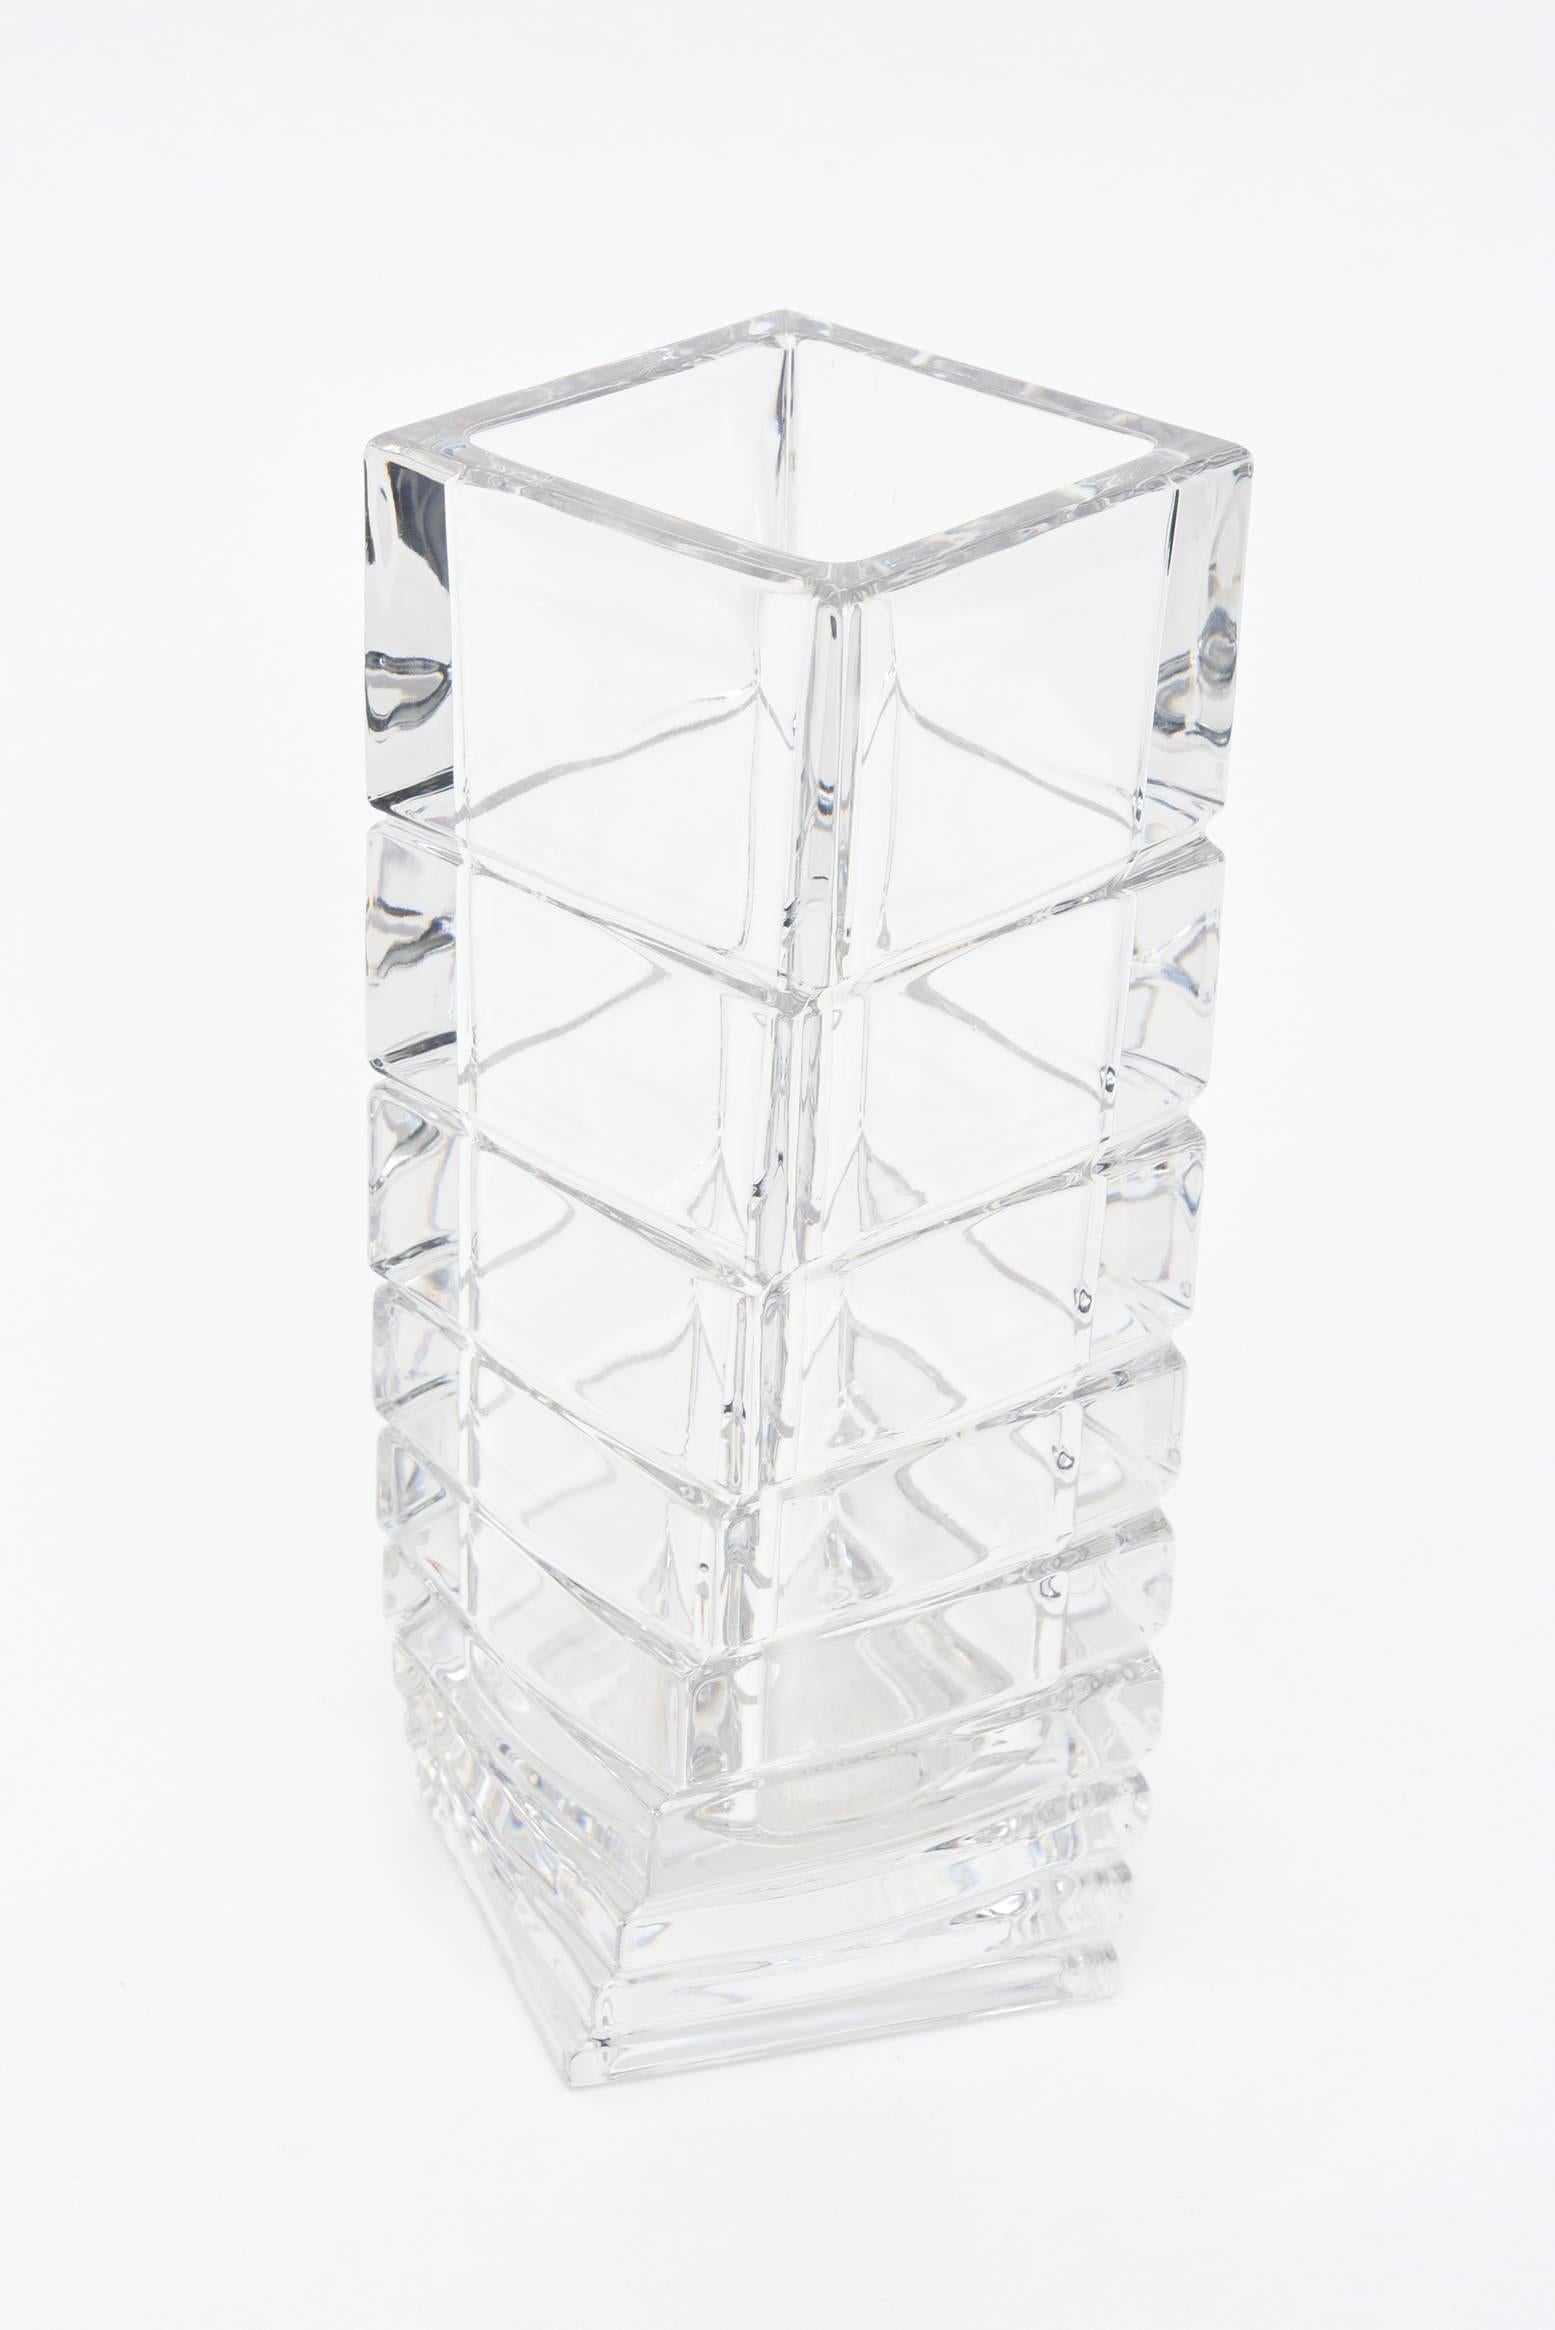 This shape and variance in this twisted and staggered Mid-Century Modern Rosenthal glass vase is usually seen in white porcelain rather than in clear glass. This is unusual now in the market. It is sculptural and architectural. Rosenthal from